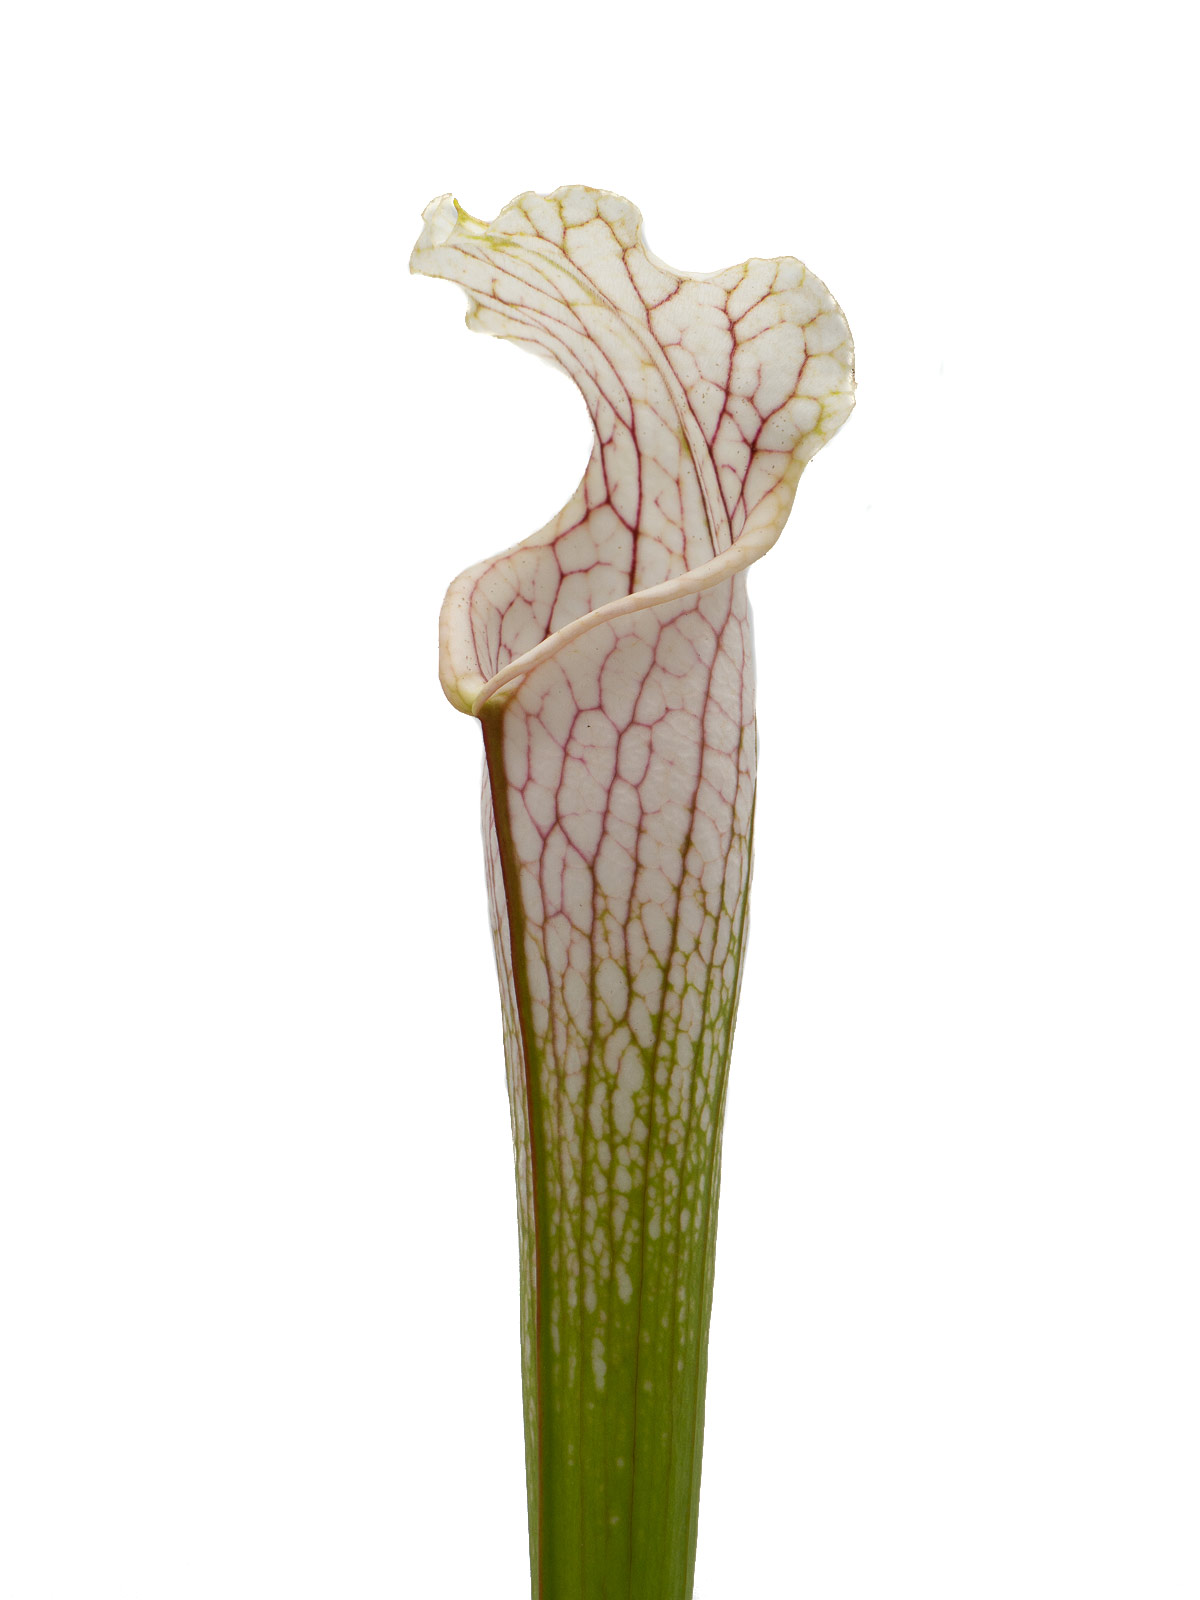 Sarracenia leucophylla - MK L14, yellow flower, Russell Road, Citronelle, Mobile County, Alabama